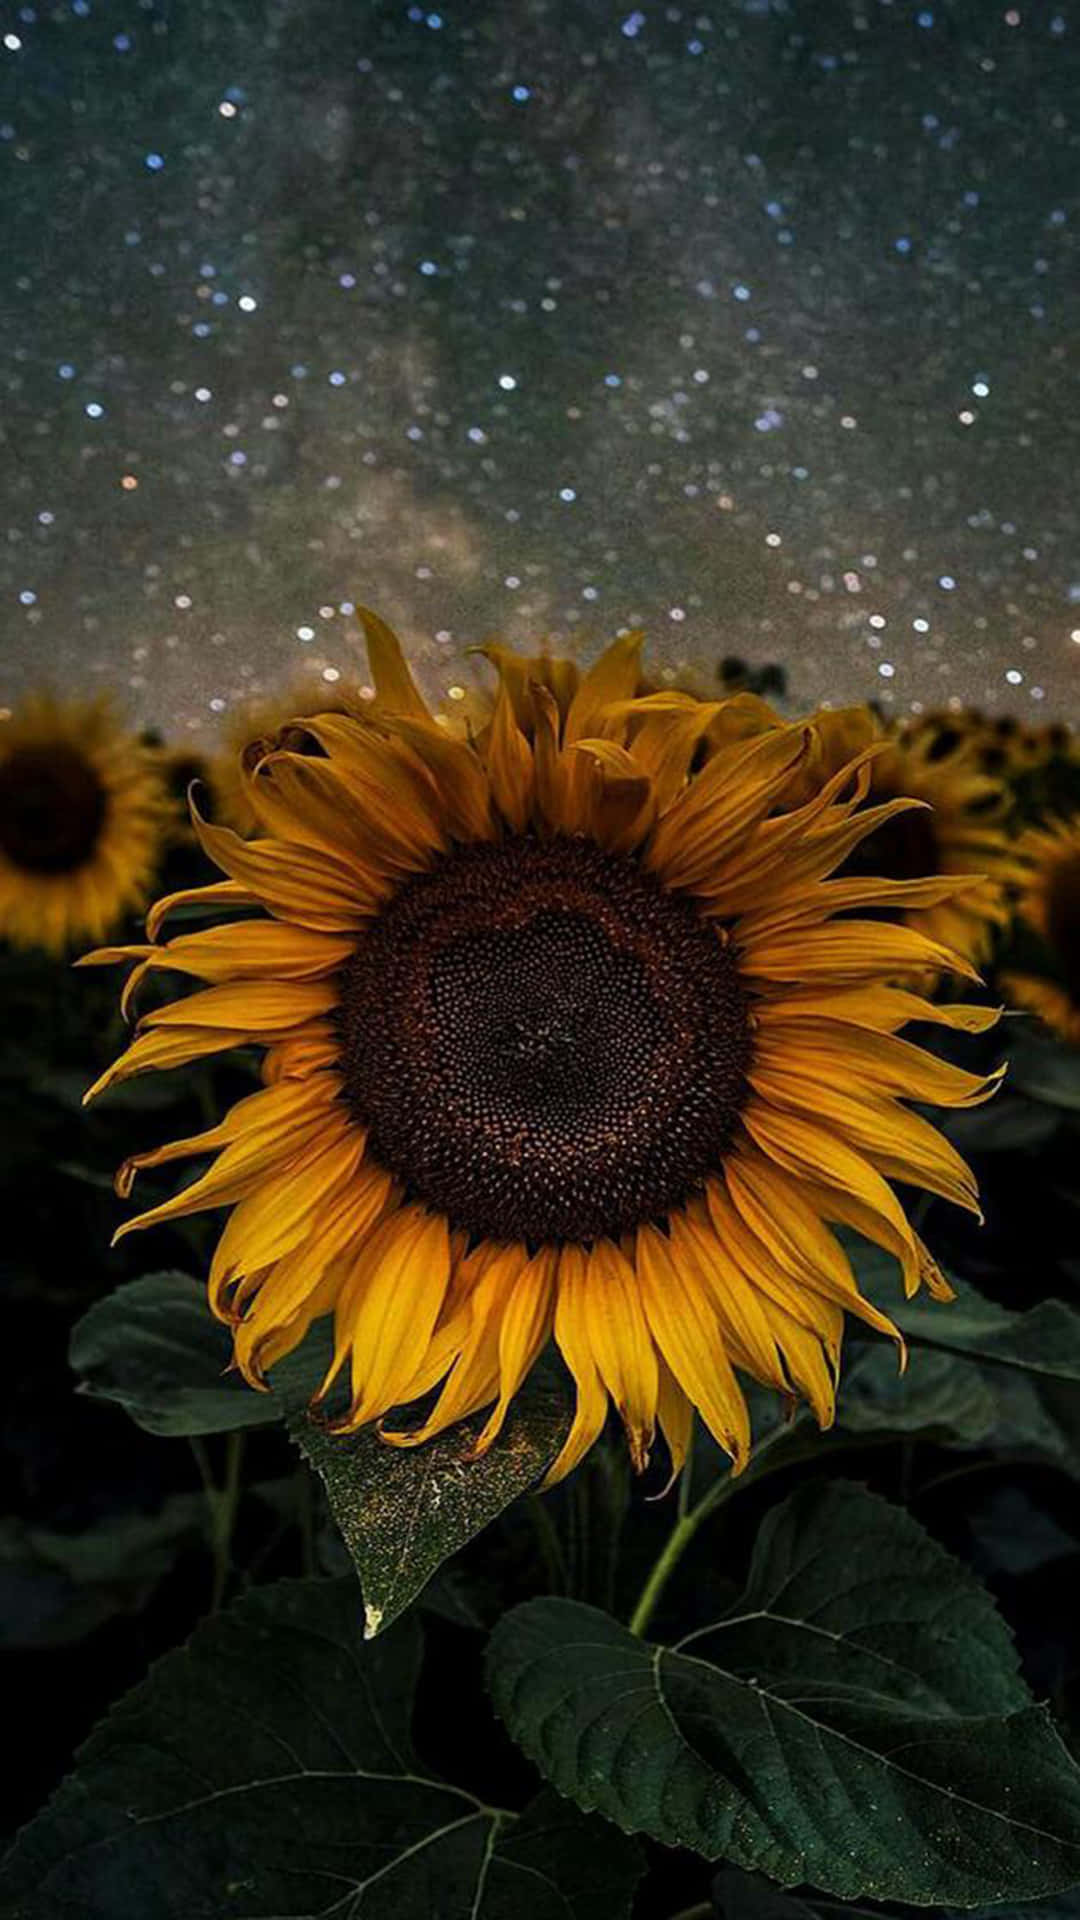 12 Super Pretty Sunflower iPhone Wallpapers | Preppy Wallpapers | Sunflower  wallpaper, Sunflower iphone wallpaper, Landscape wallpaper